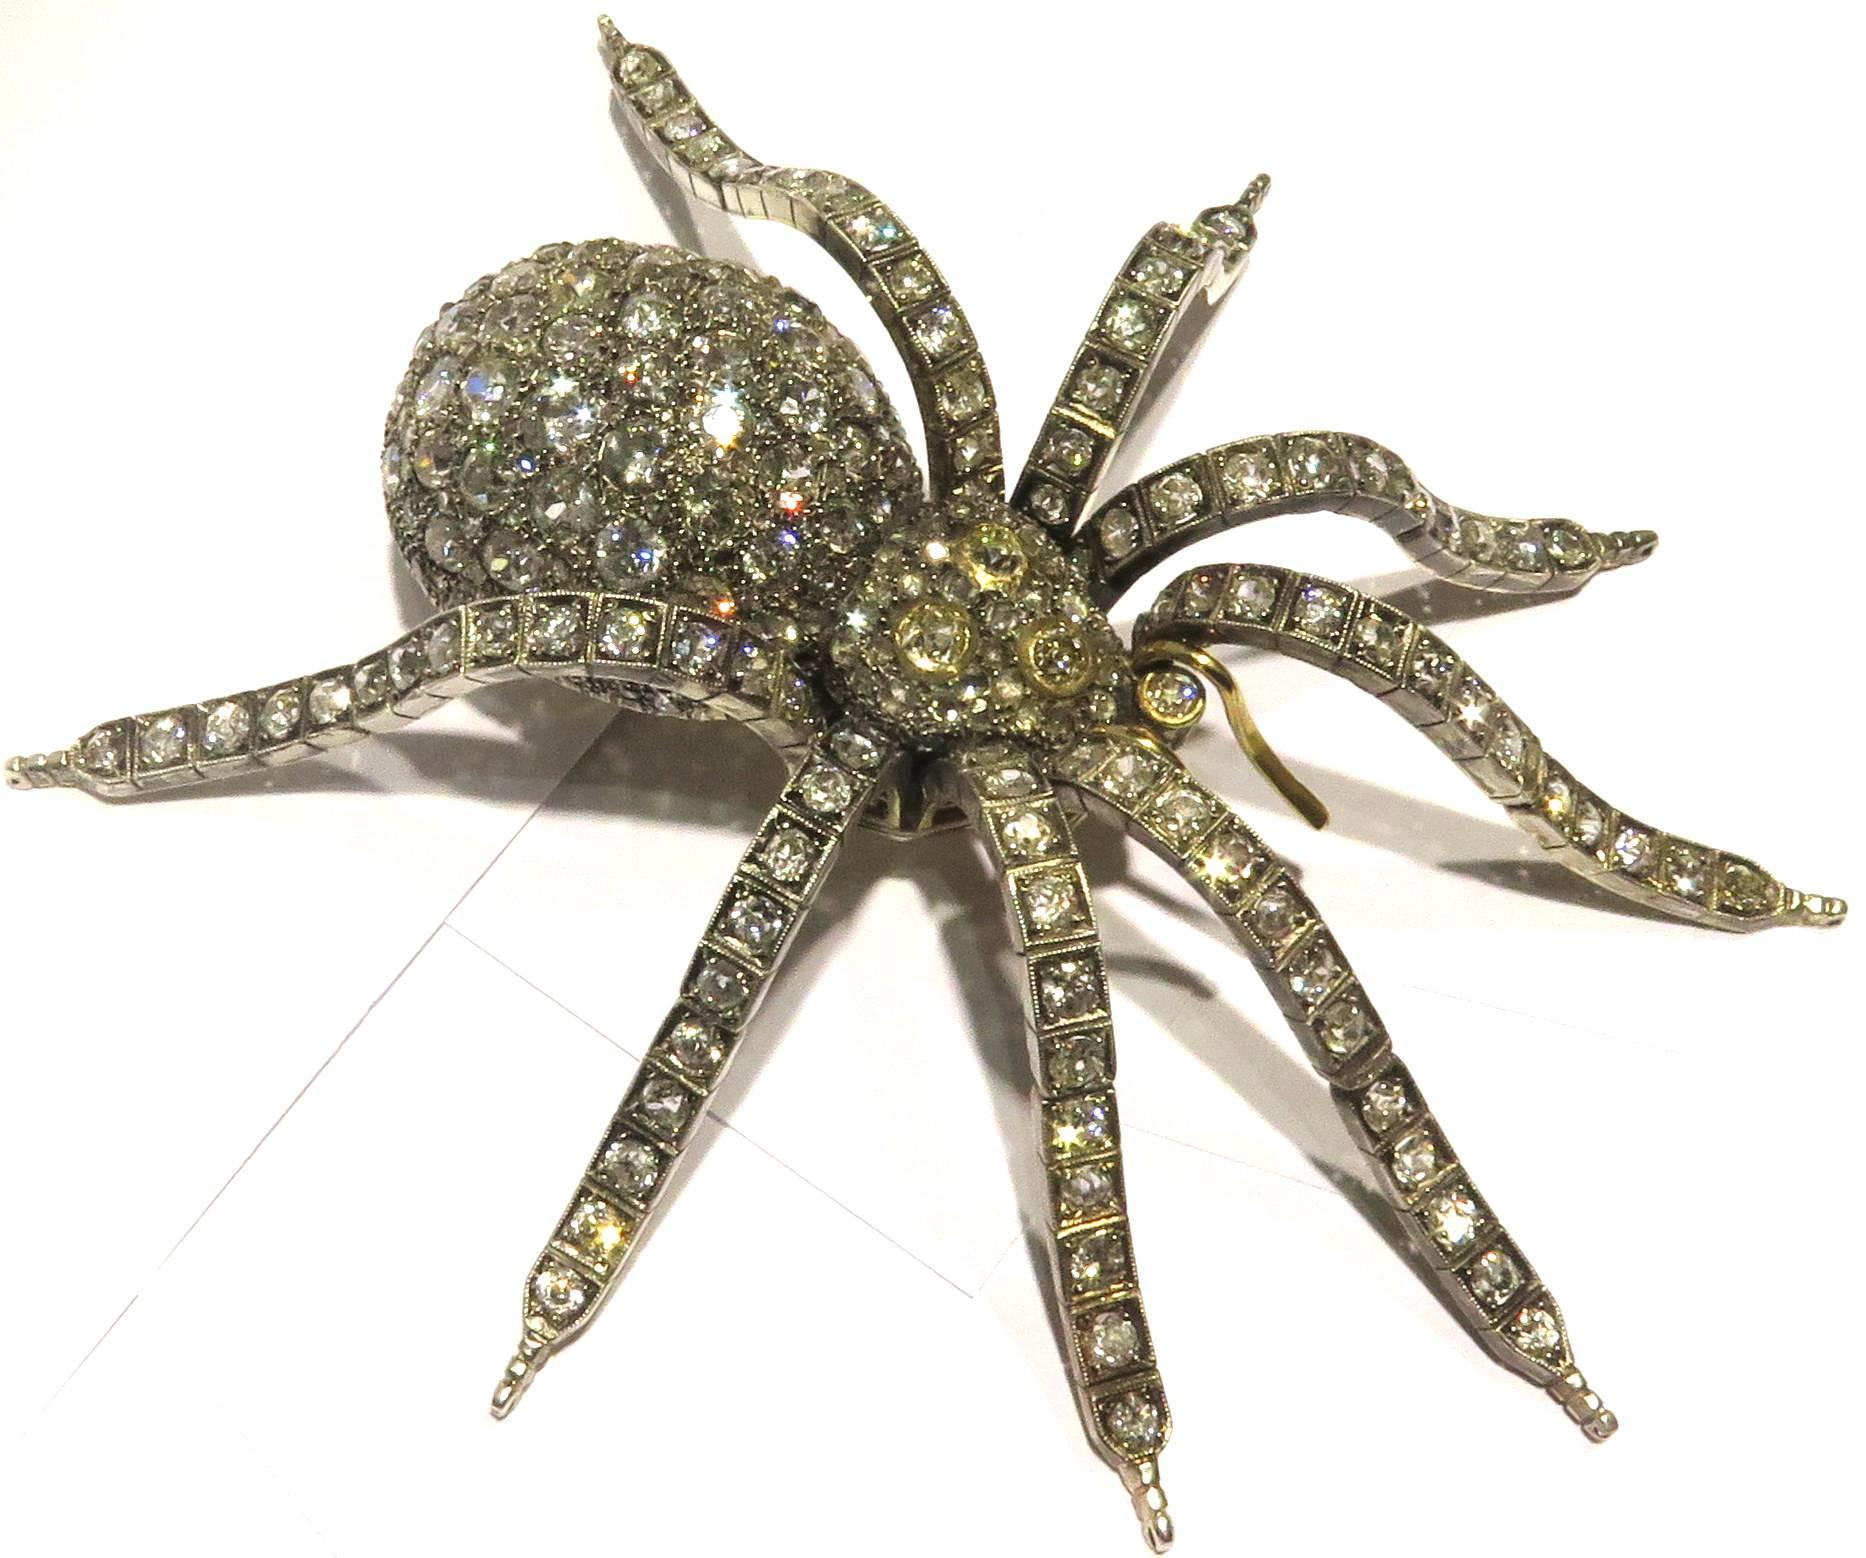 Magnificent XtraLarge Spider Pin 5 5/8 in 43cts Diamonds Gold SilverTremblant c In Excellent Condition In Palm Beach, FL